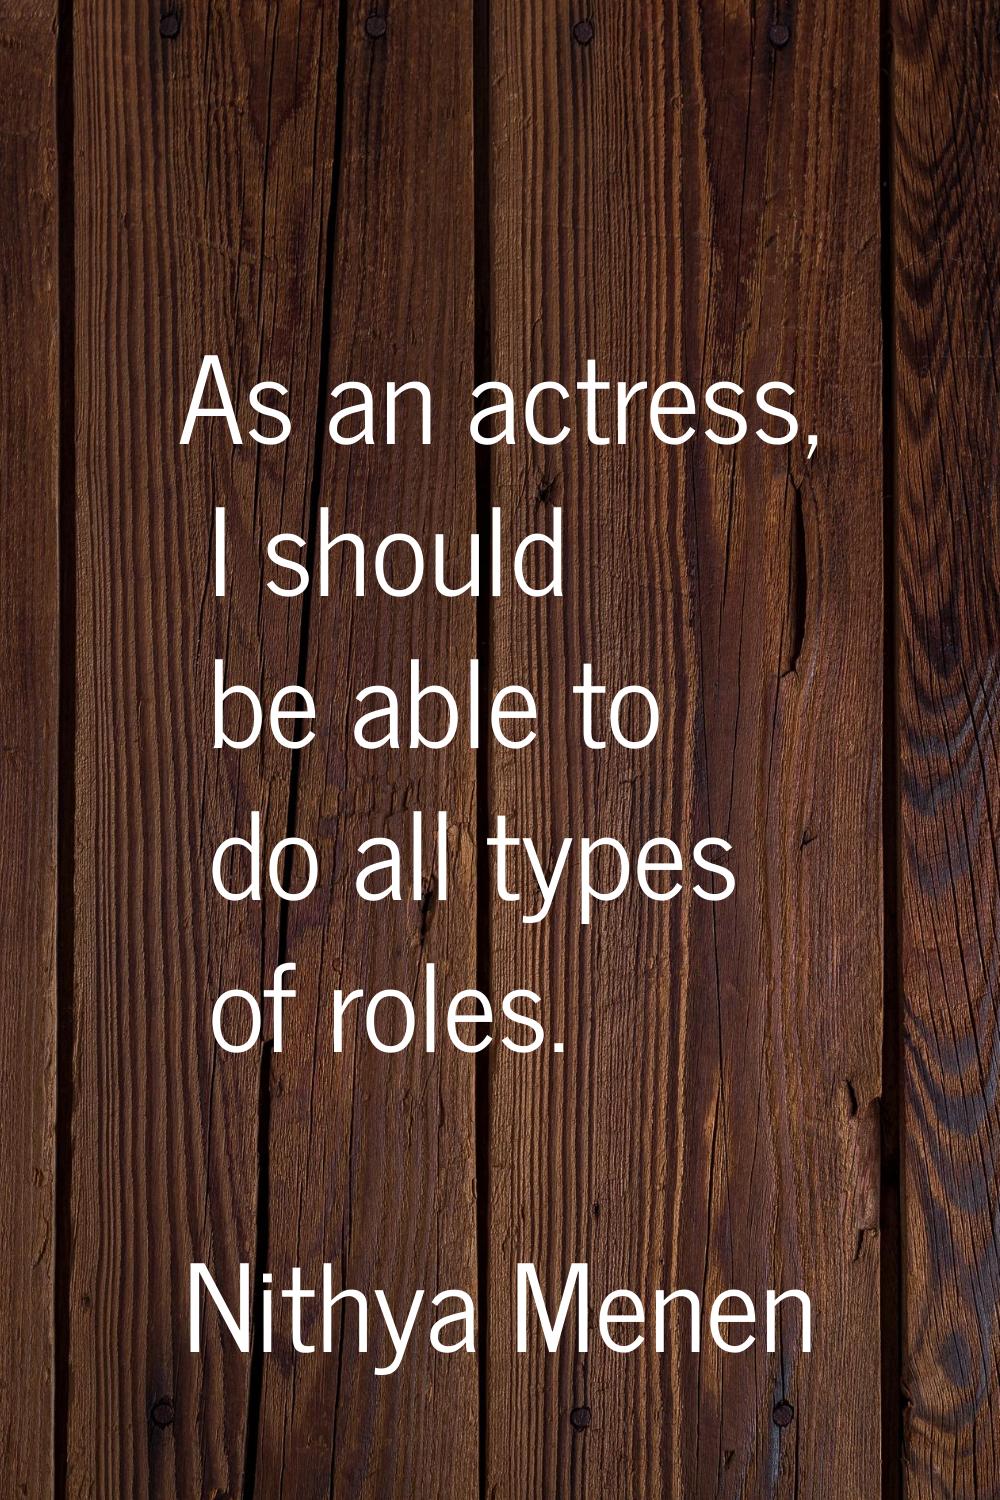 As an actress, I should be able to do all types of roles.